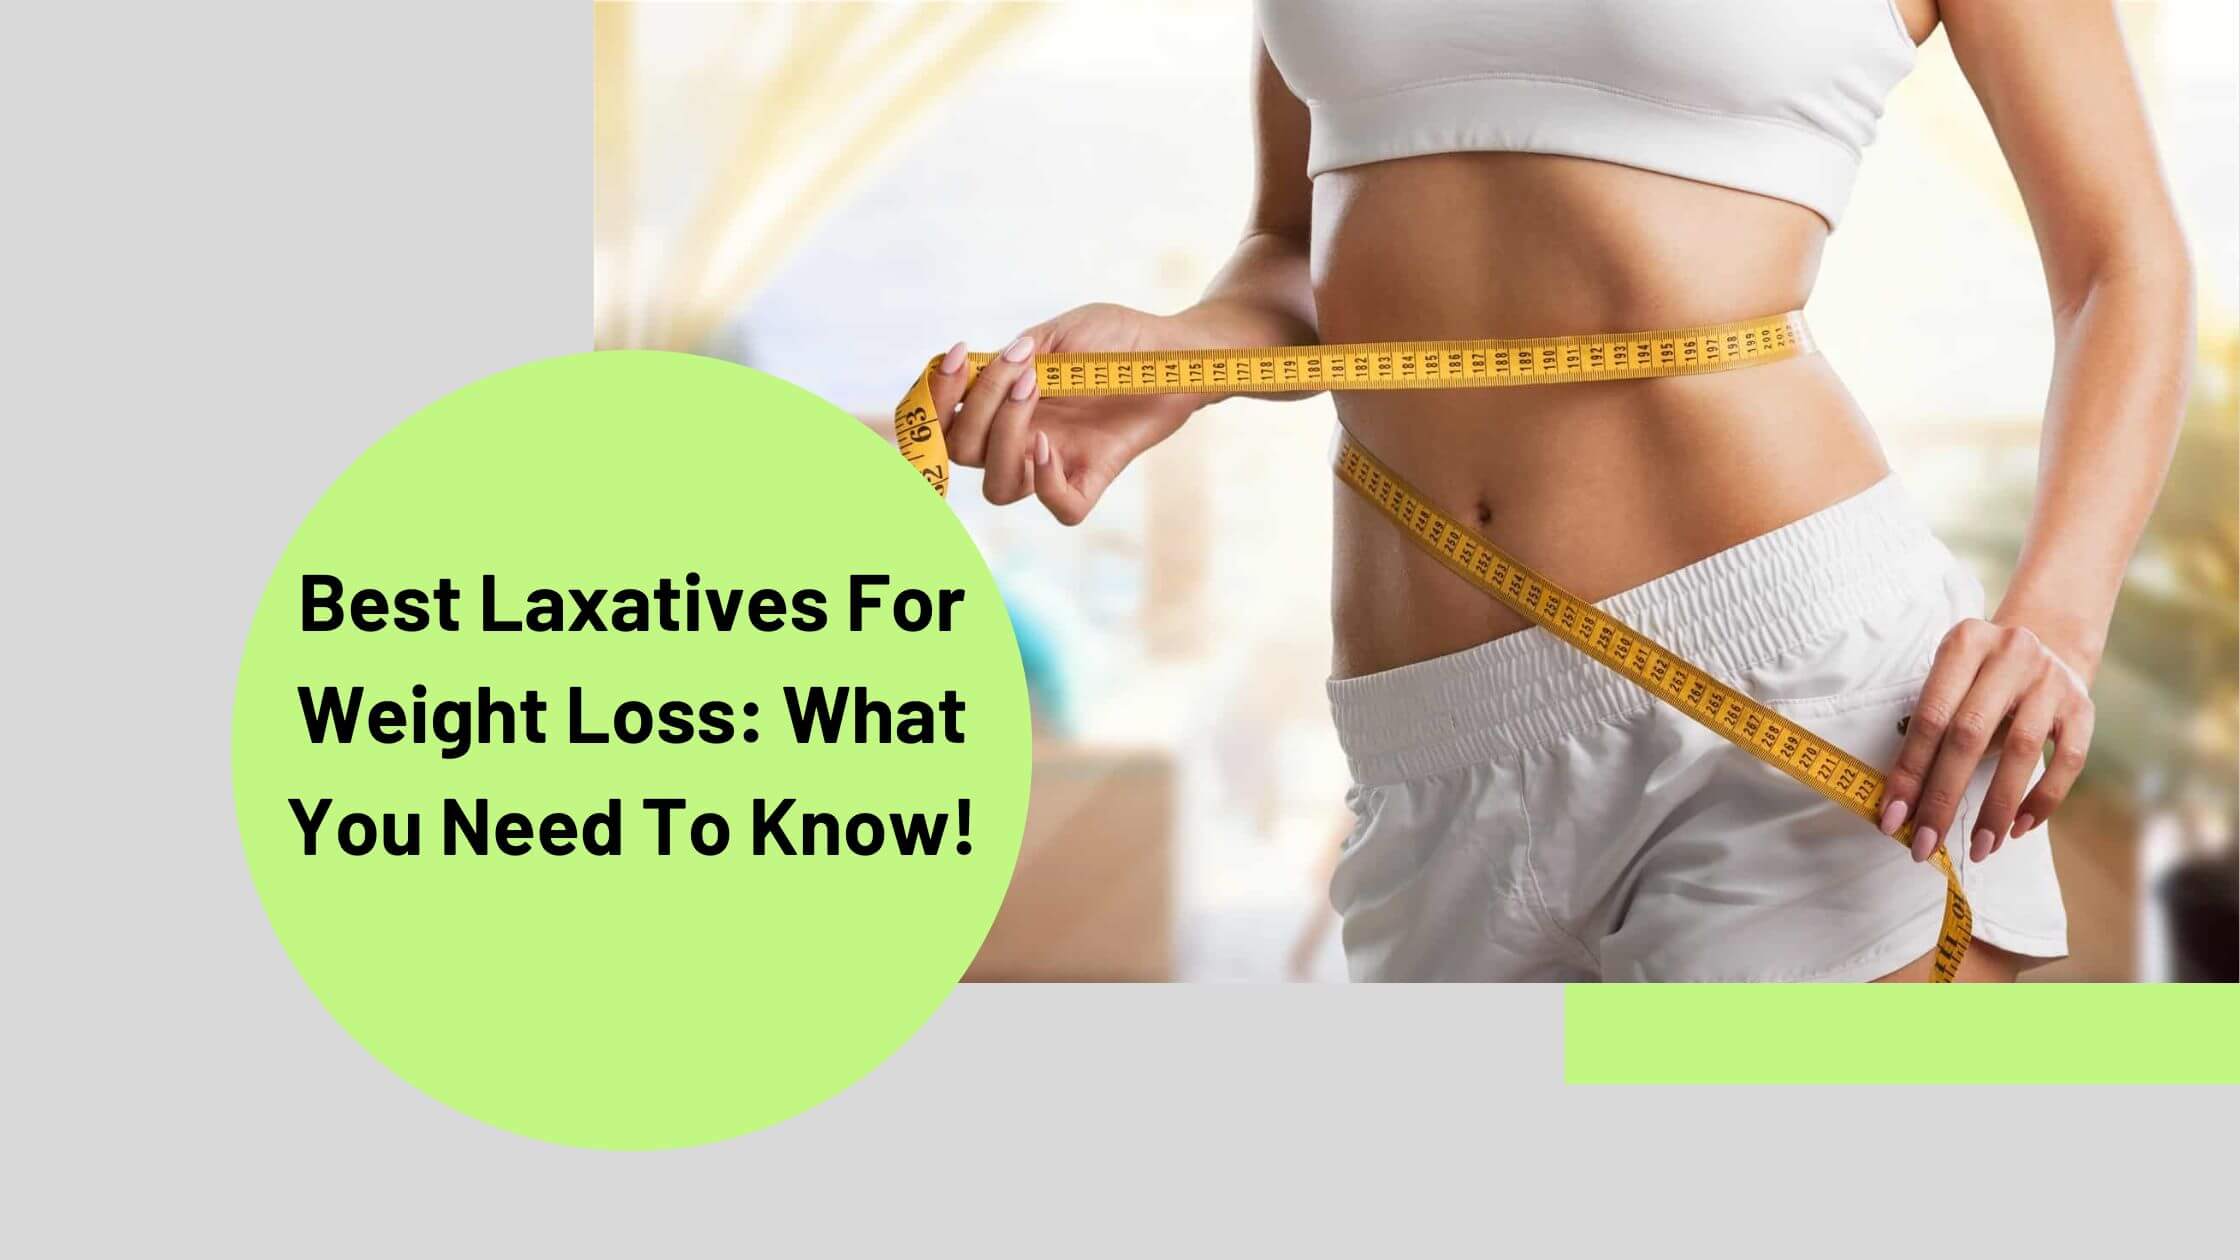 Best Laxatives For Weight Loss